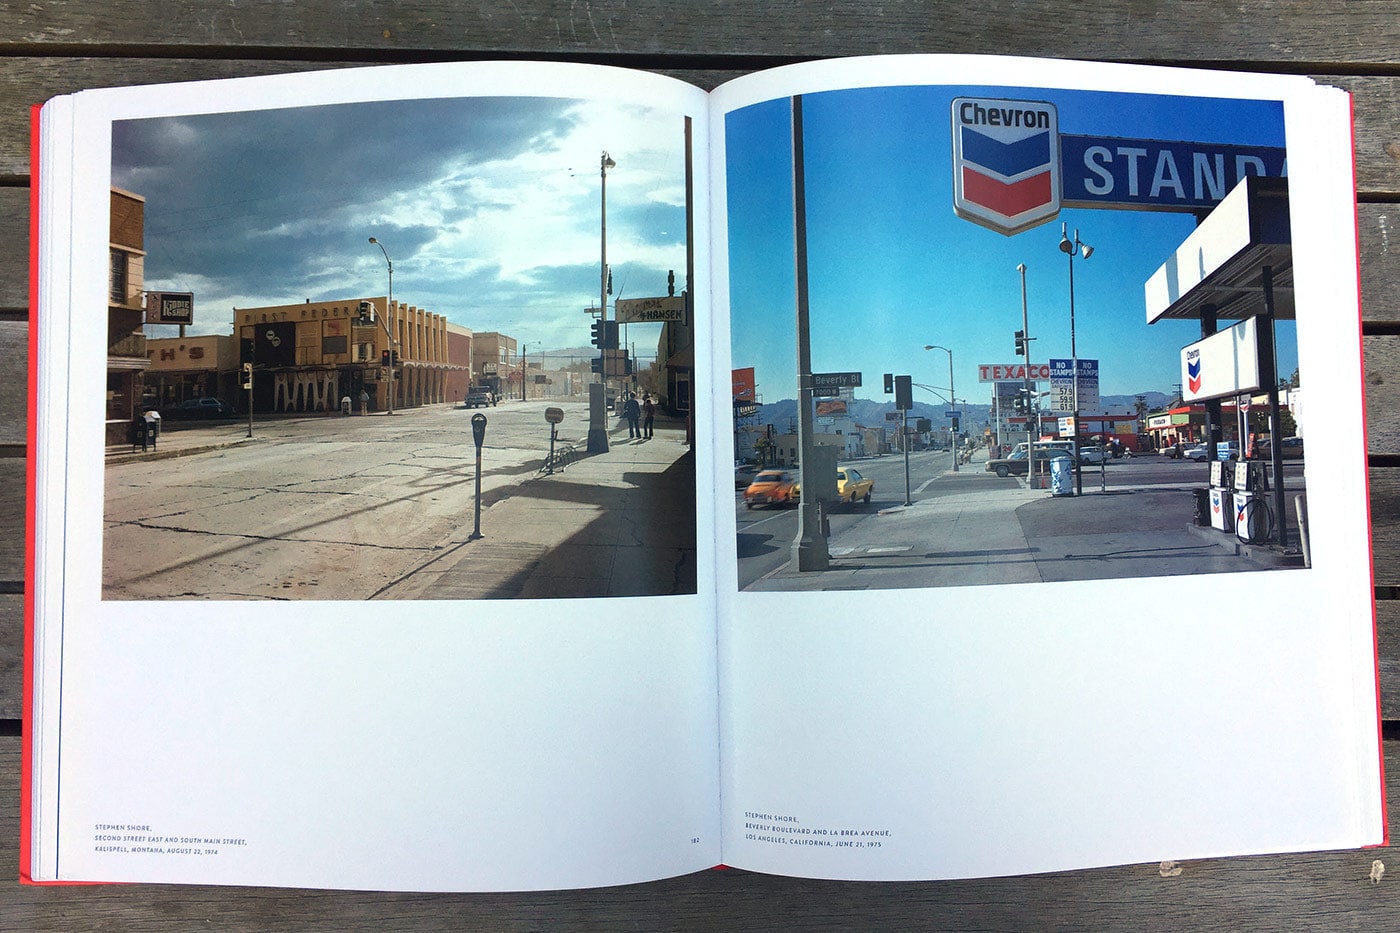 Stephen Shore photos in The Open Road